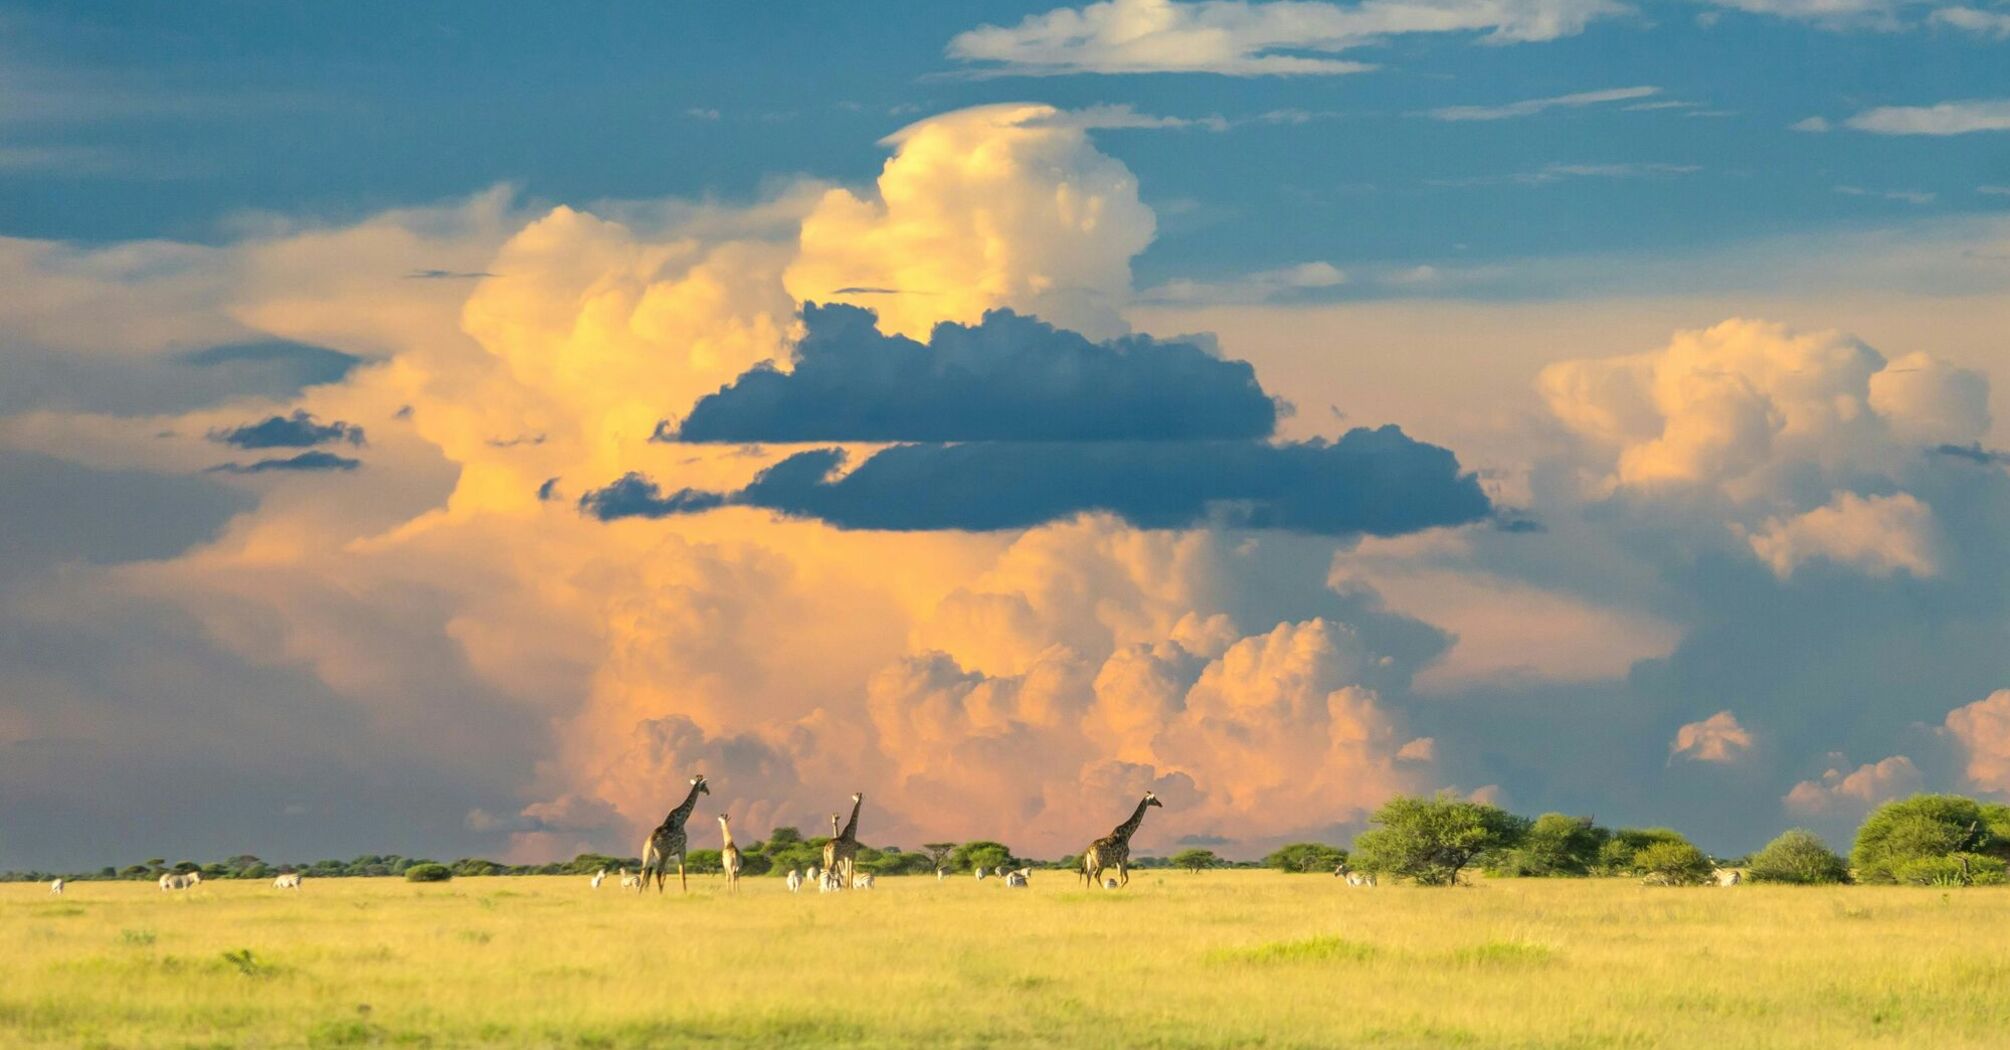 Green grass field with several giraffes under cloudy sky during daytime